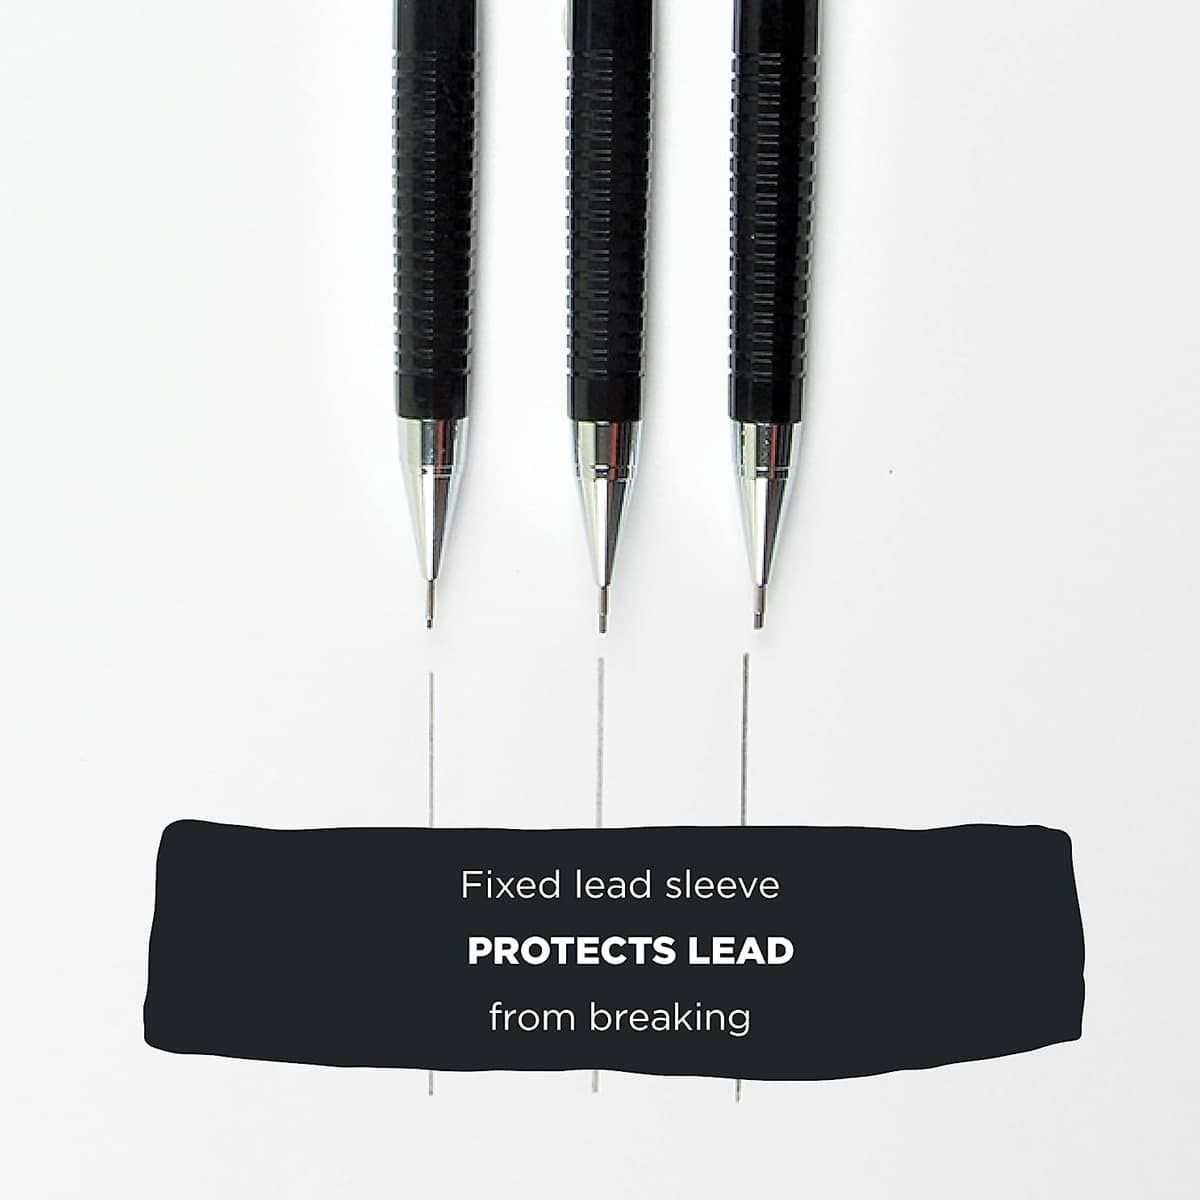 Protects lead from breaking